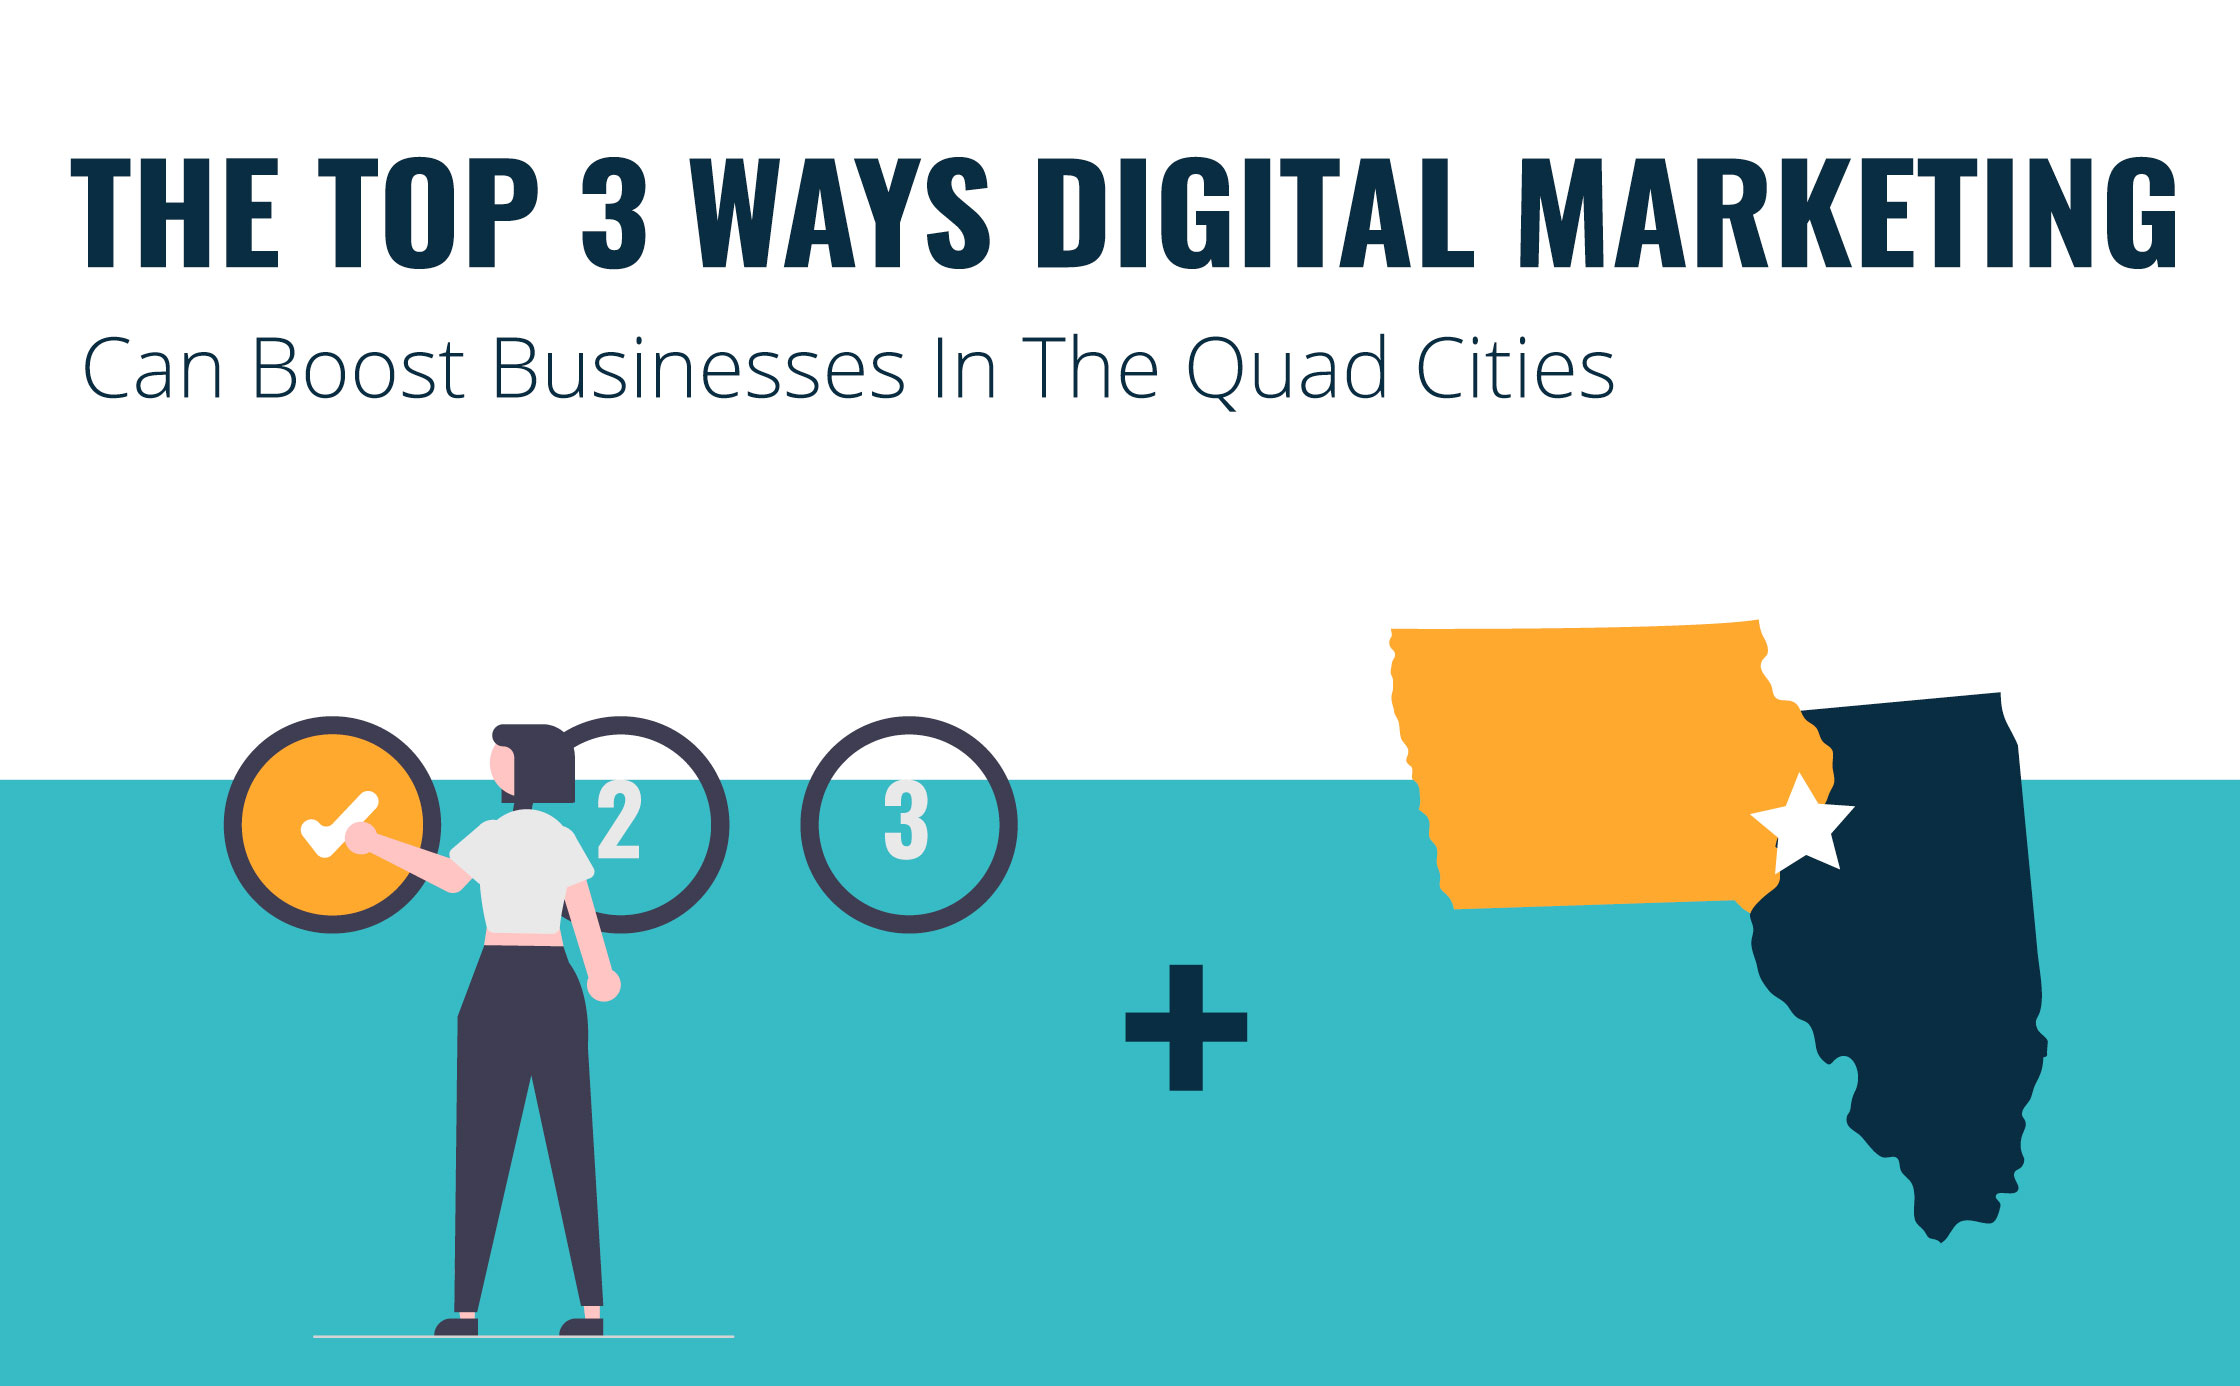 Digital Marketing Services In The Quad Cities